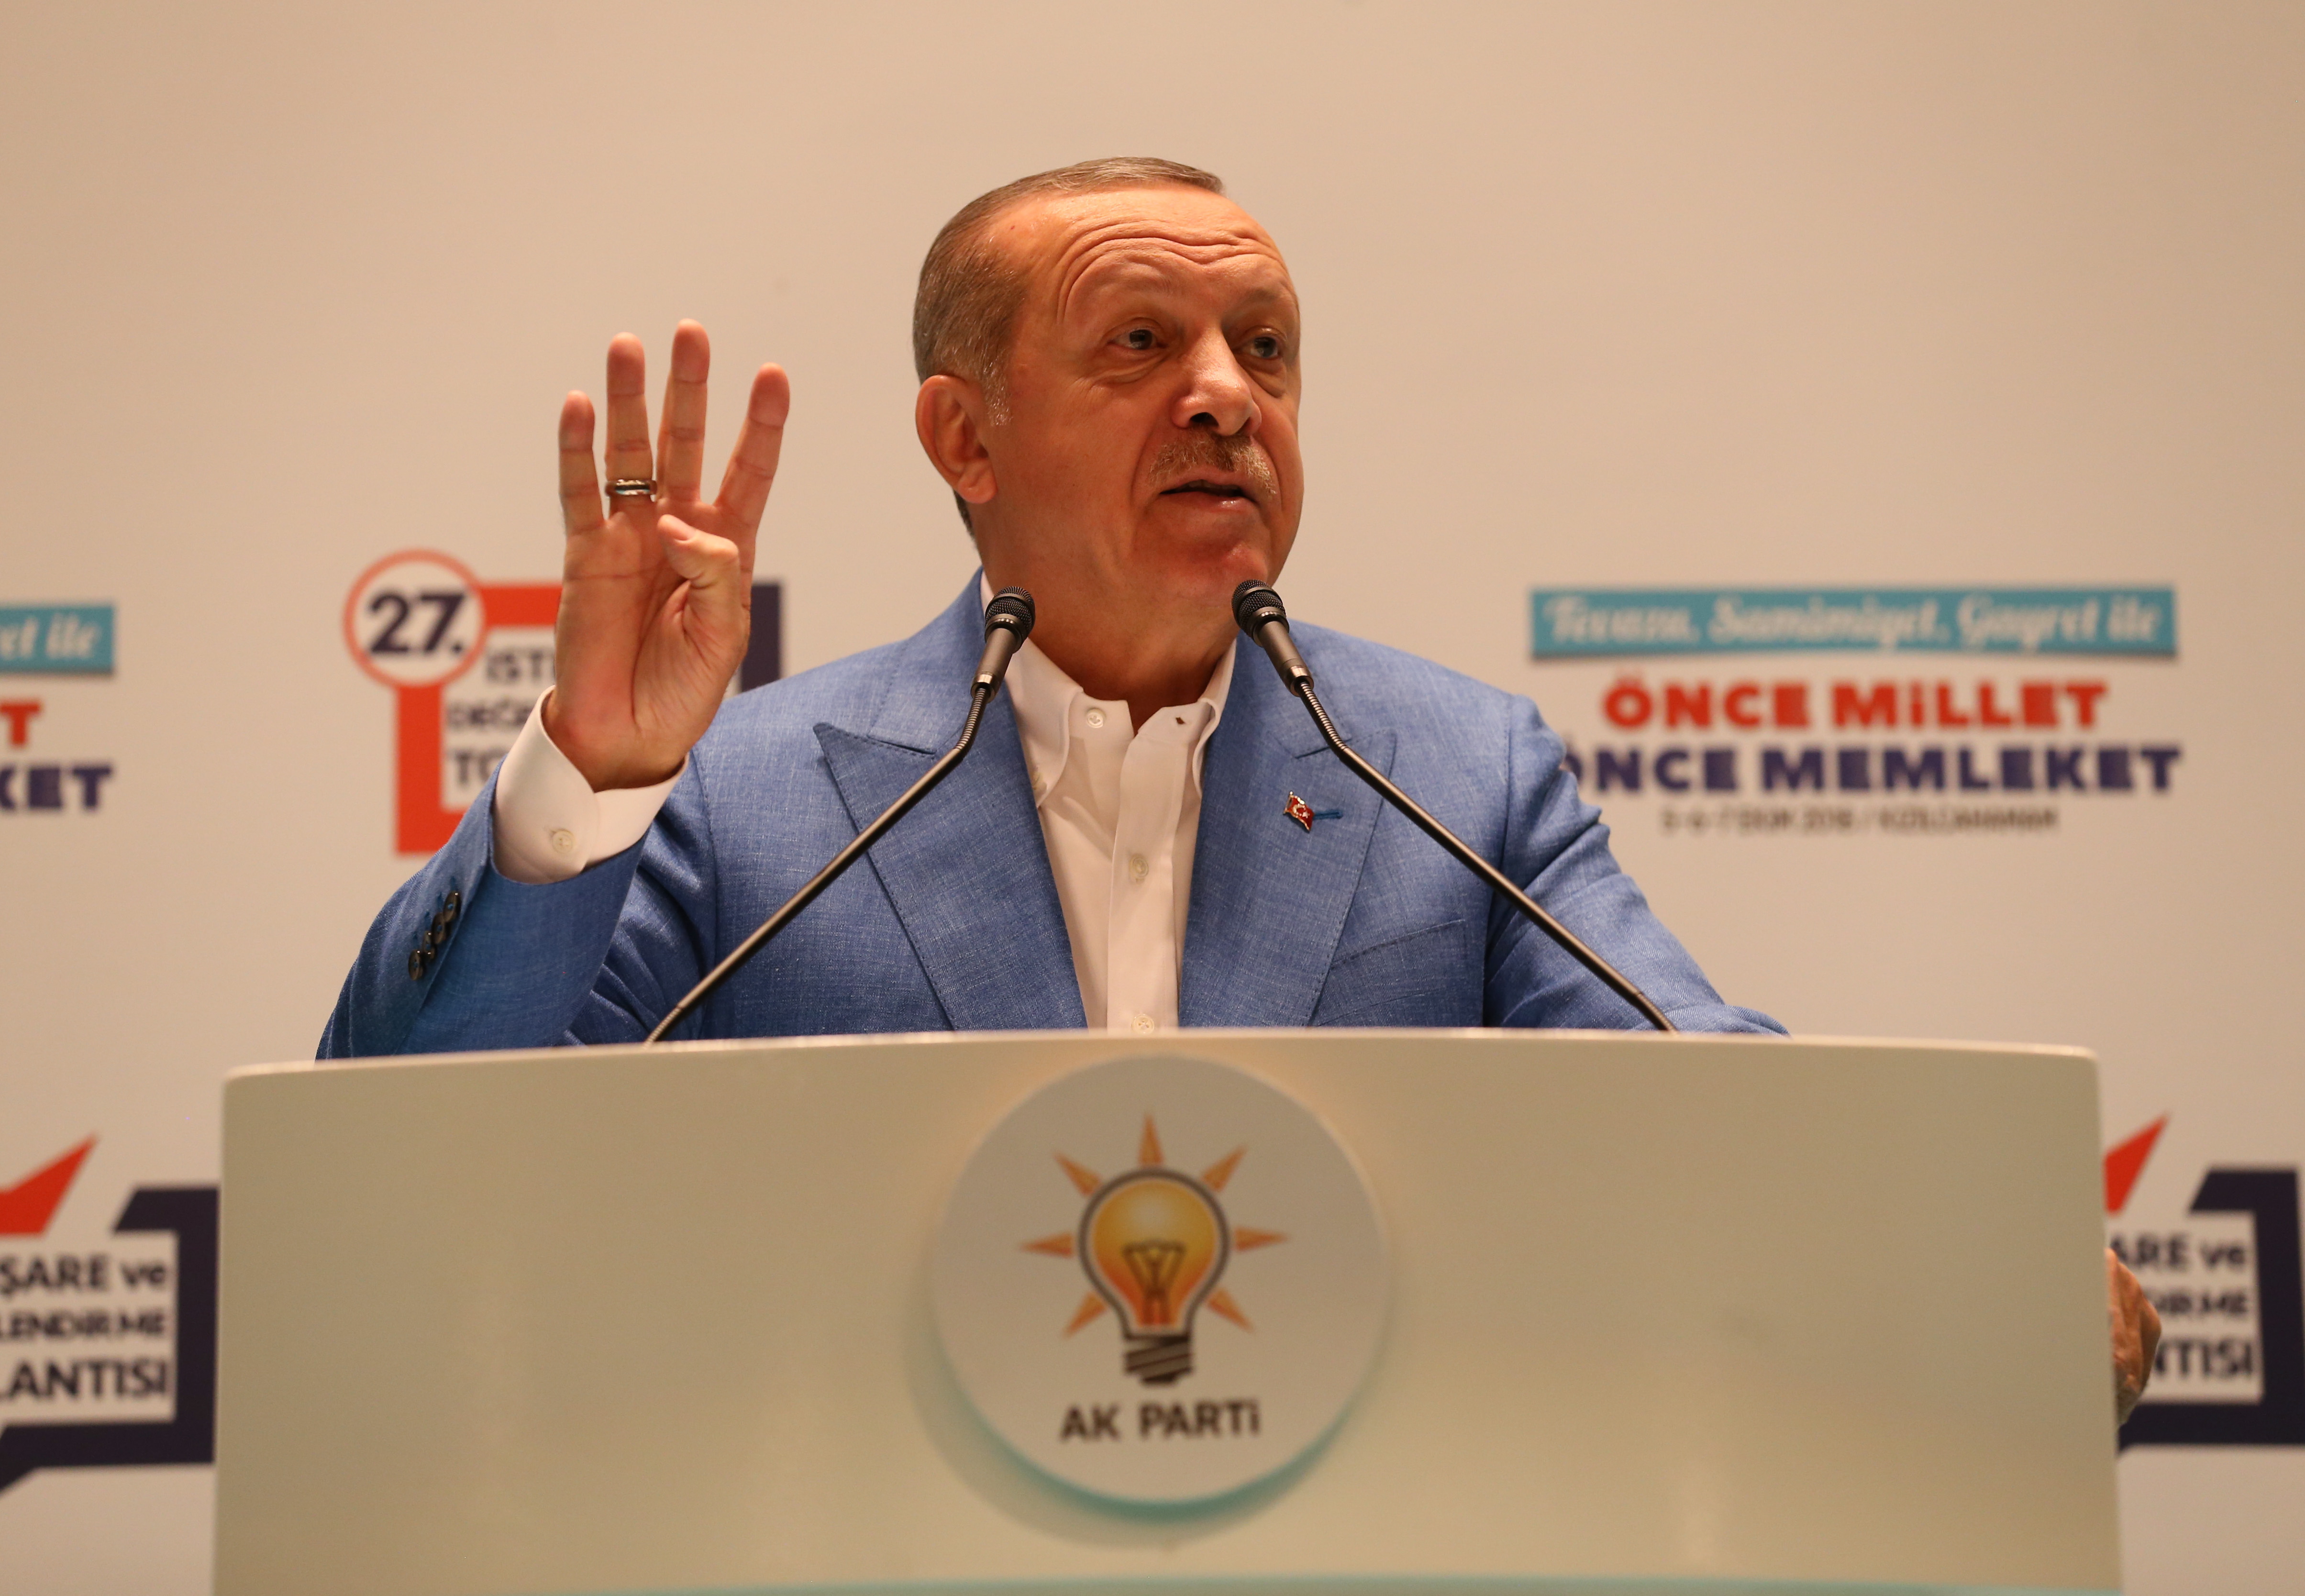 epa07076789 A handout photo made available by the Turkish President Press Office shows Turkish President Recep Tayyip Erdogan speaking during his Justice and Development (AK) party meeting in Ankara, Turkey, 07 October 2018. Media reports state Erdogan said he is following the developments on the disappearance of Saudi journalist Jamal Khashoggi who has gone missing after visiting the Saudi consulate in Istanbul on 02 October.  EPA/CEM OKSUZ HANDOUT  HANDOUT EDITORIAL USE ONLY/NO SALES